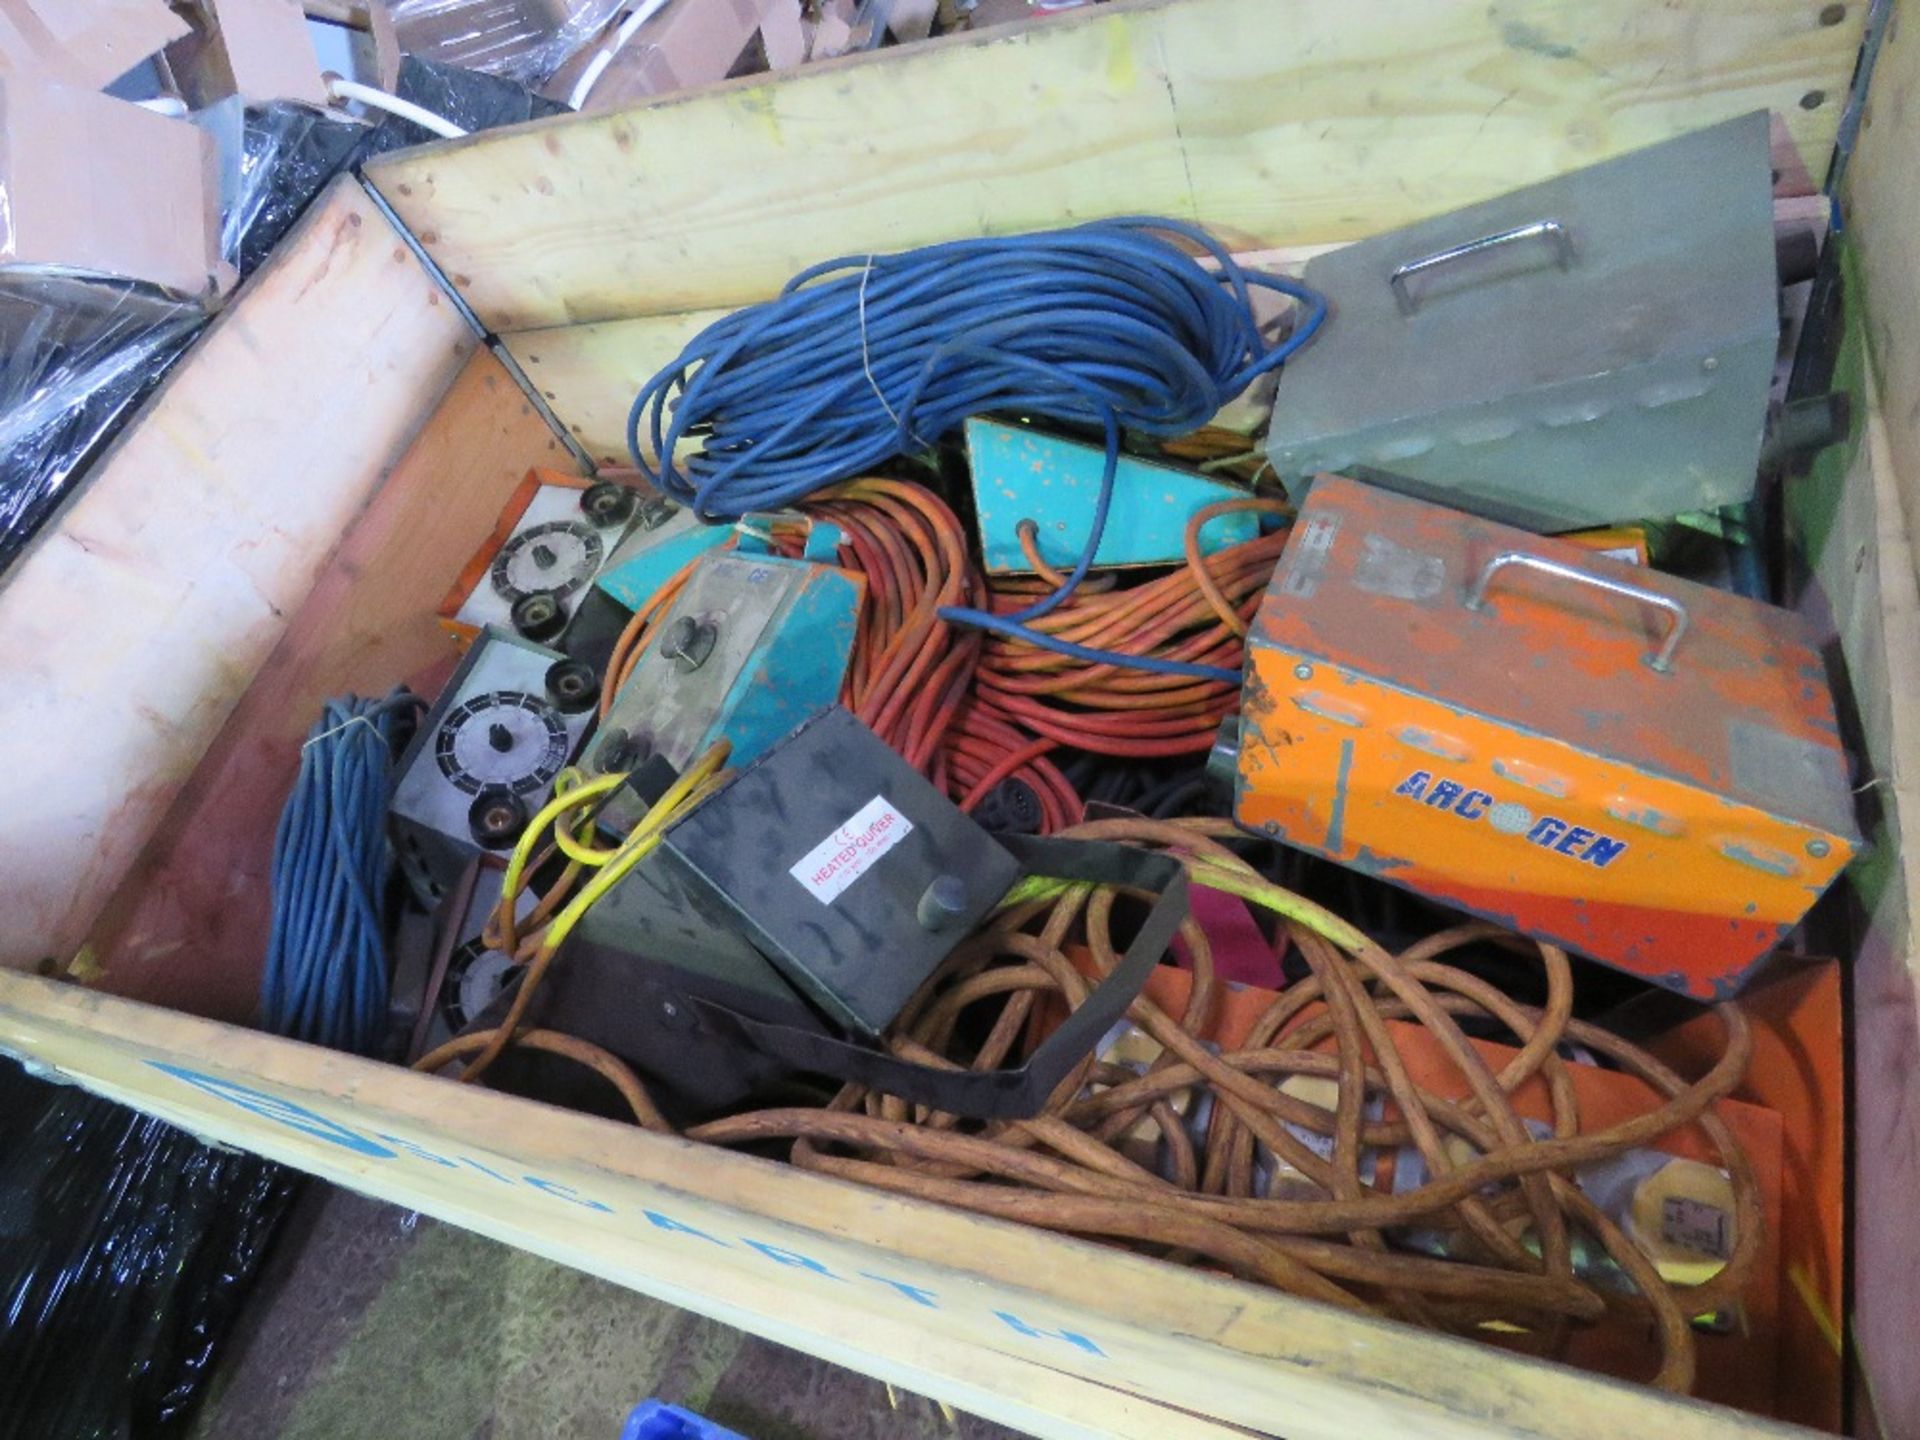 STILLAGE OF WELDING LEADS AND CONTROLLERS ETC. - Image 7 of 7